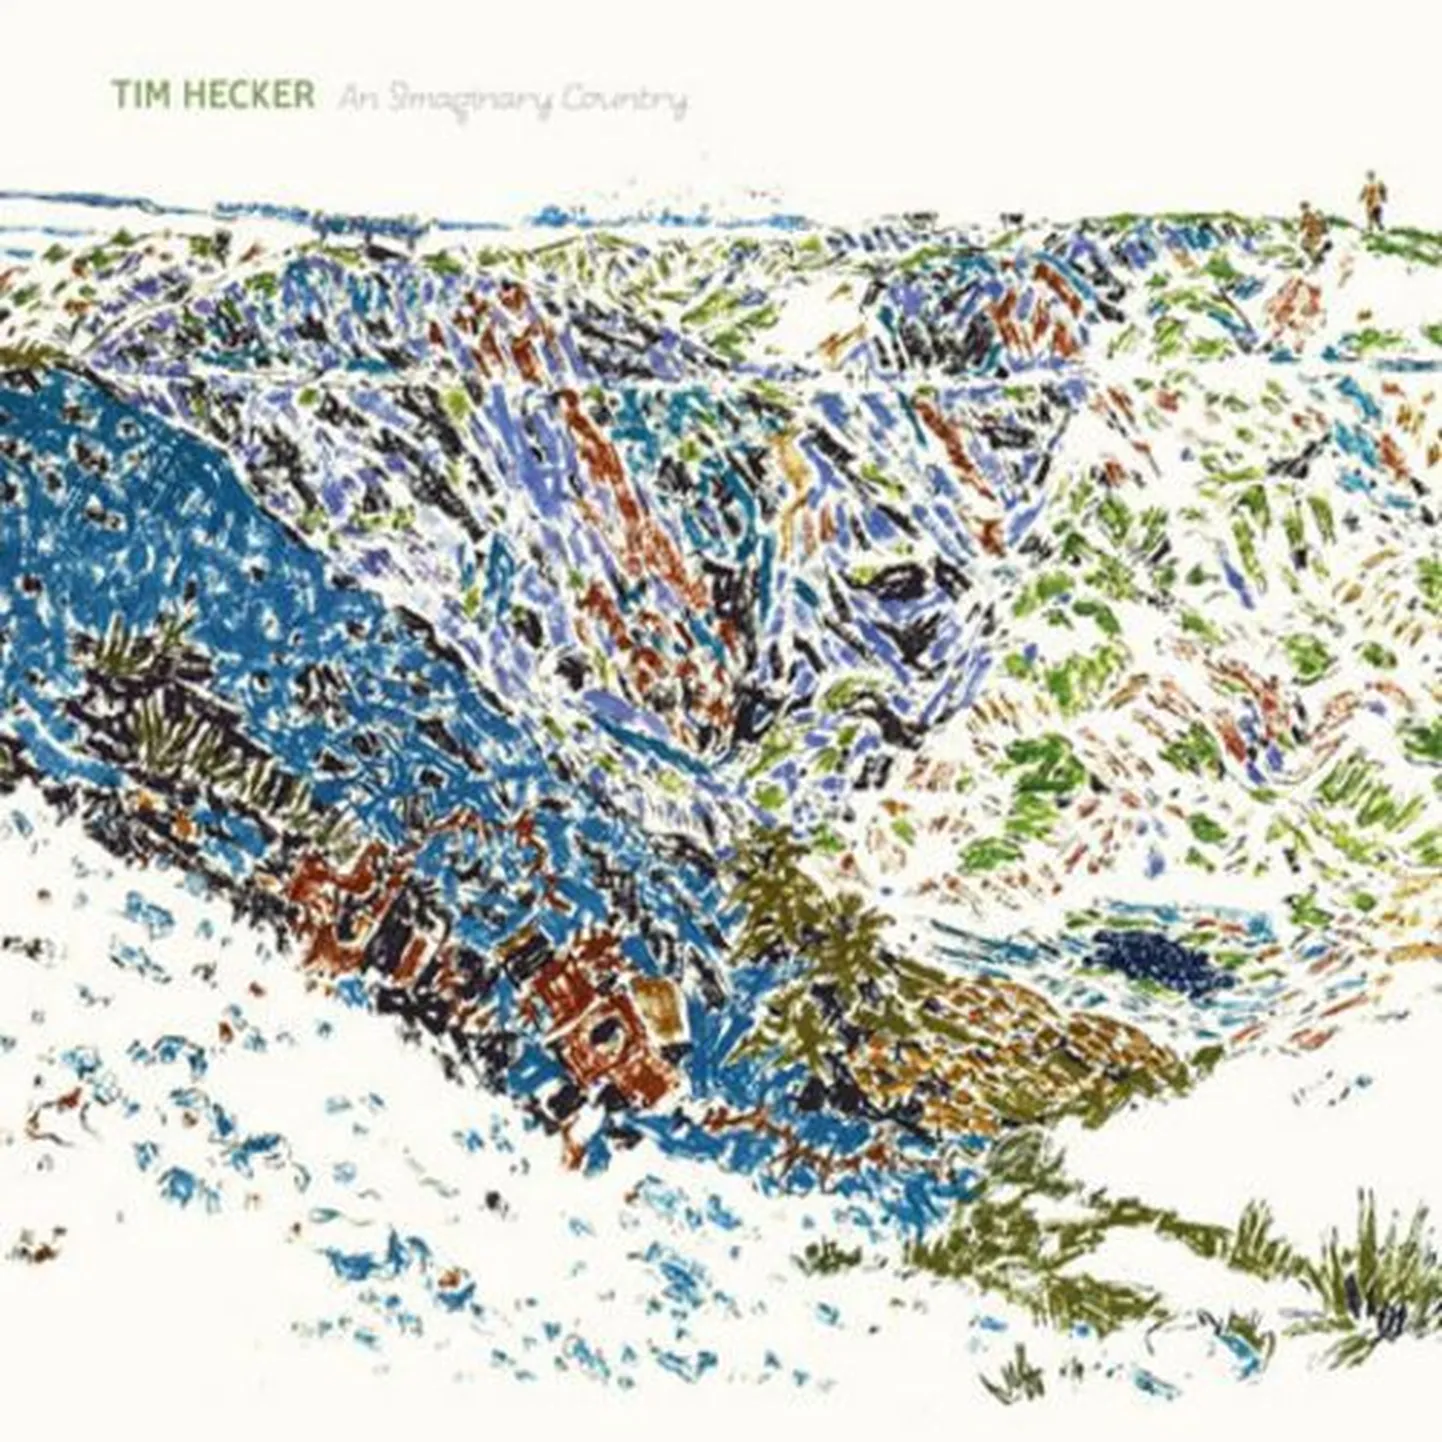 Tim Hecker “An Imaginary Country”.